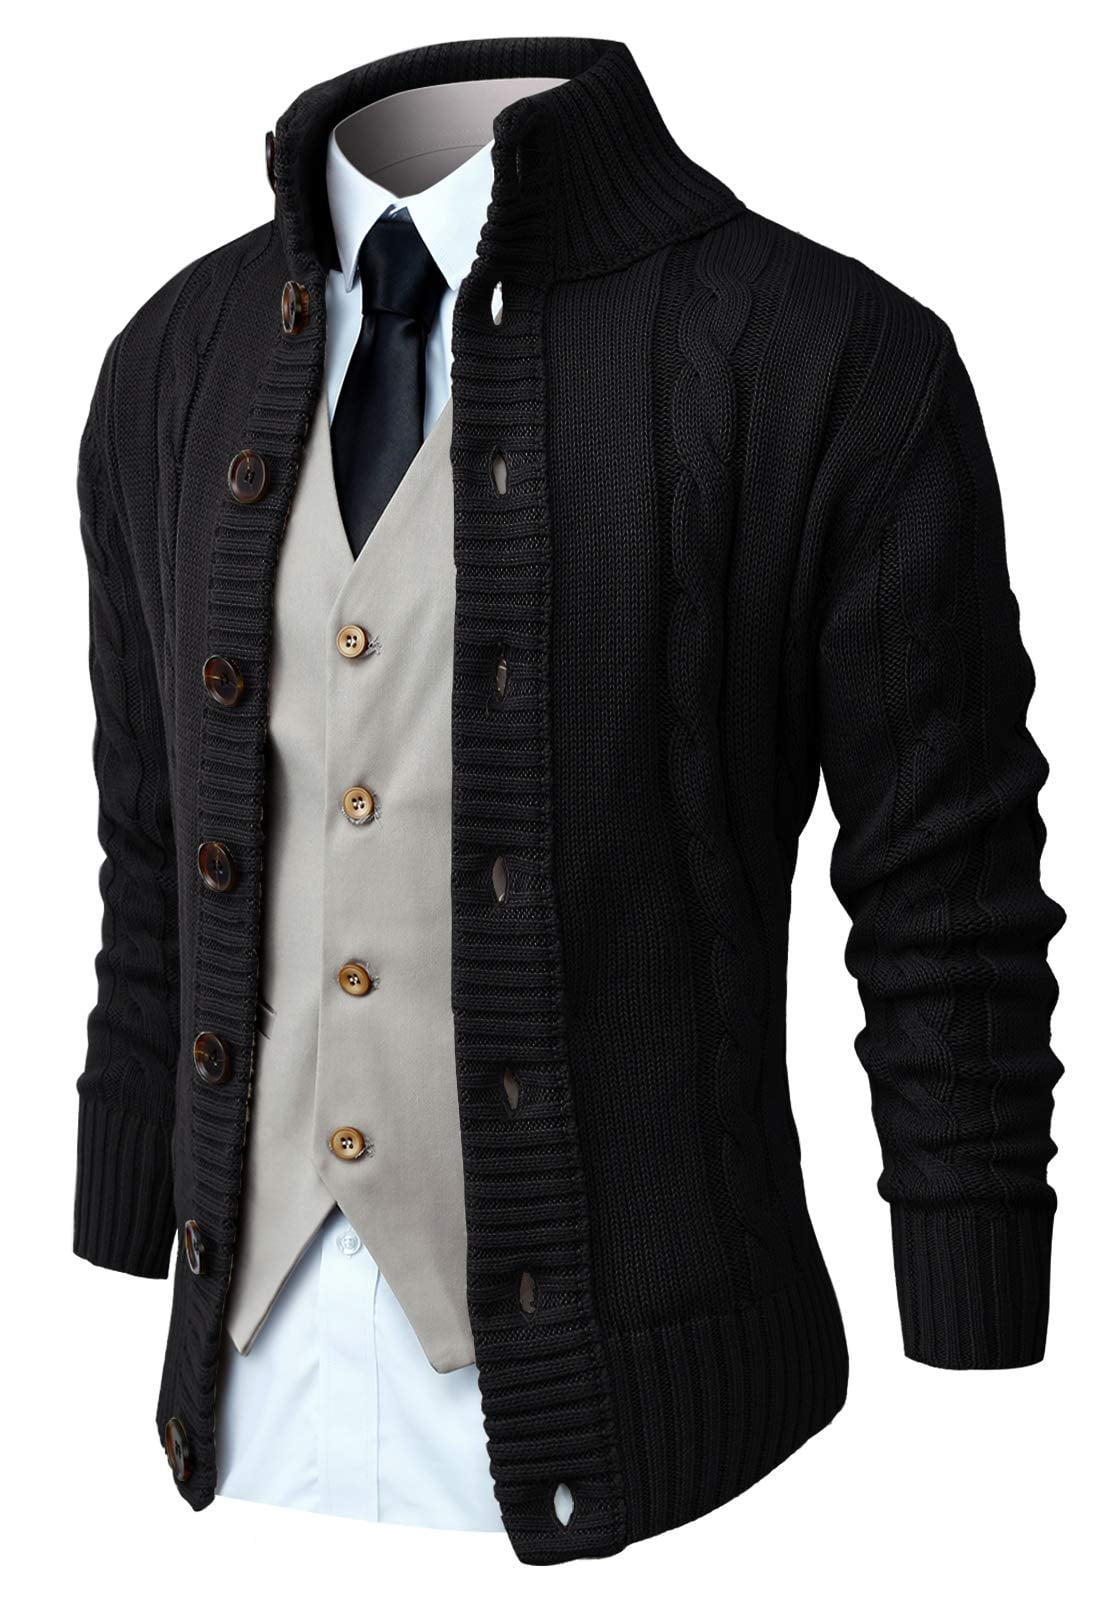 Iceglad Mens Long Sleeve Stand Collar Cardigan Sweaters Button Down ...